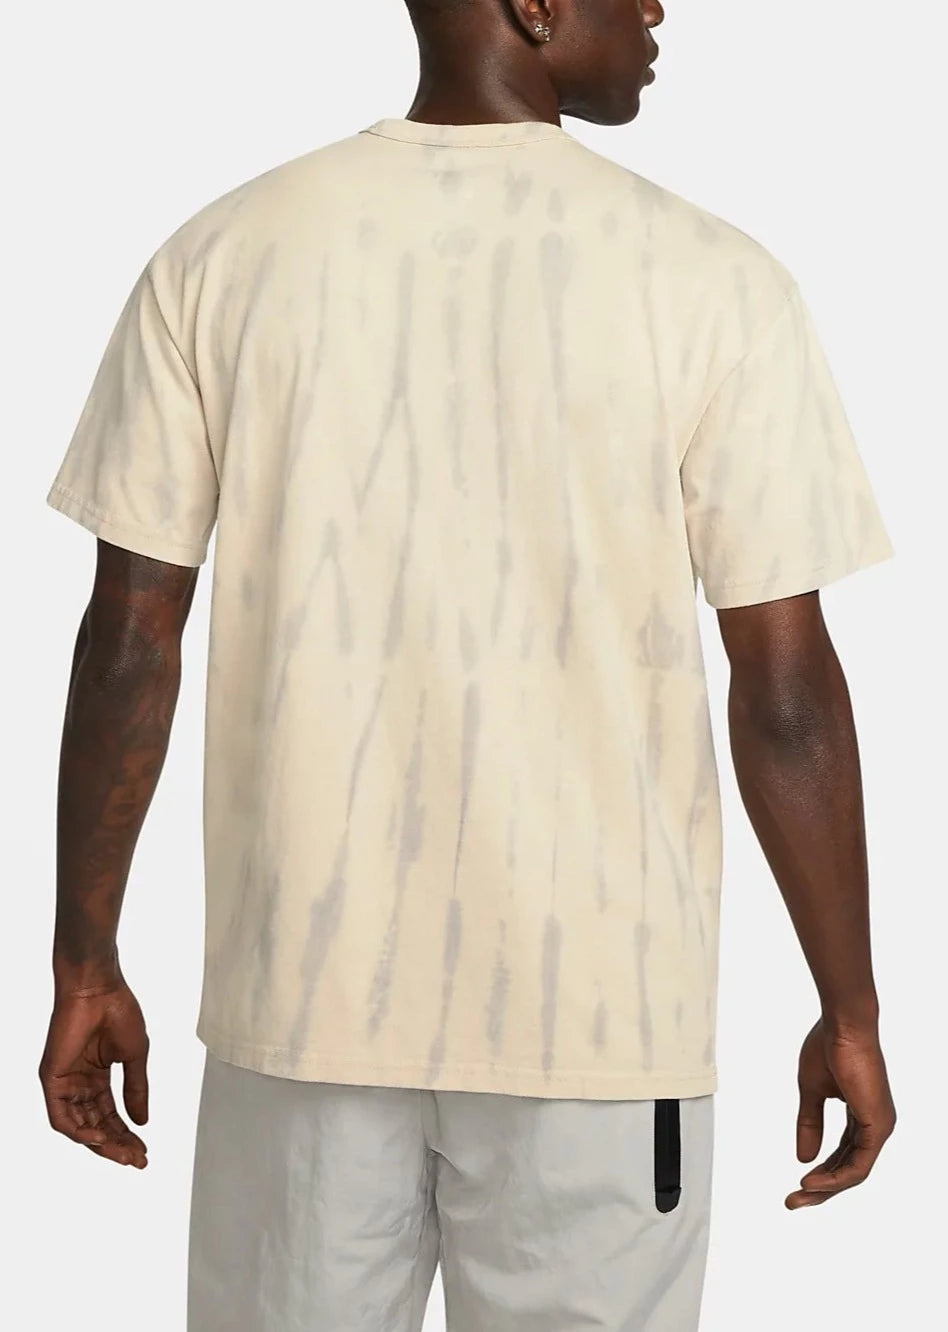 Nike Tie-Dyed T-Shirt